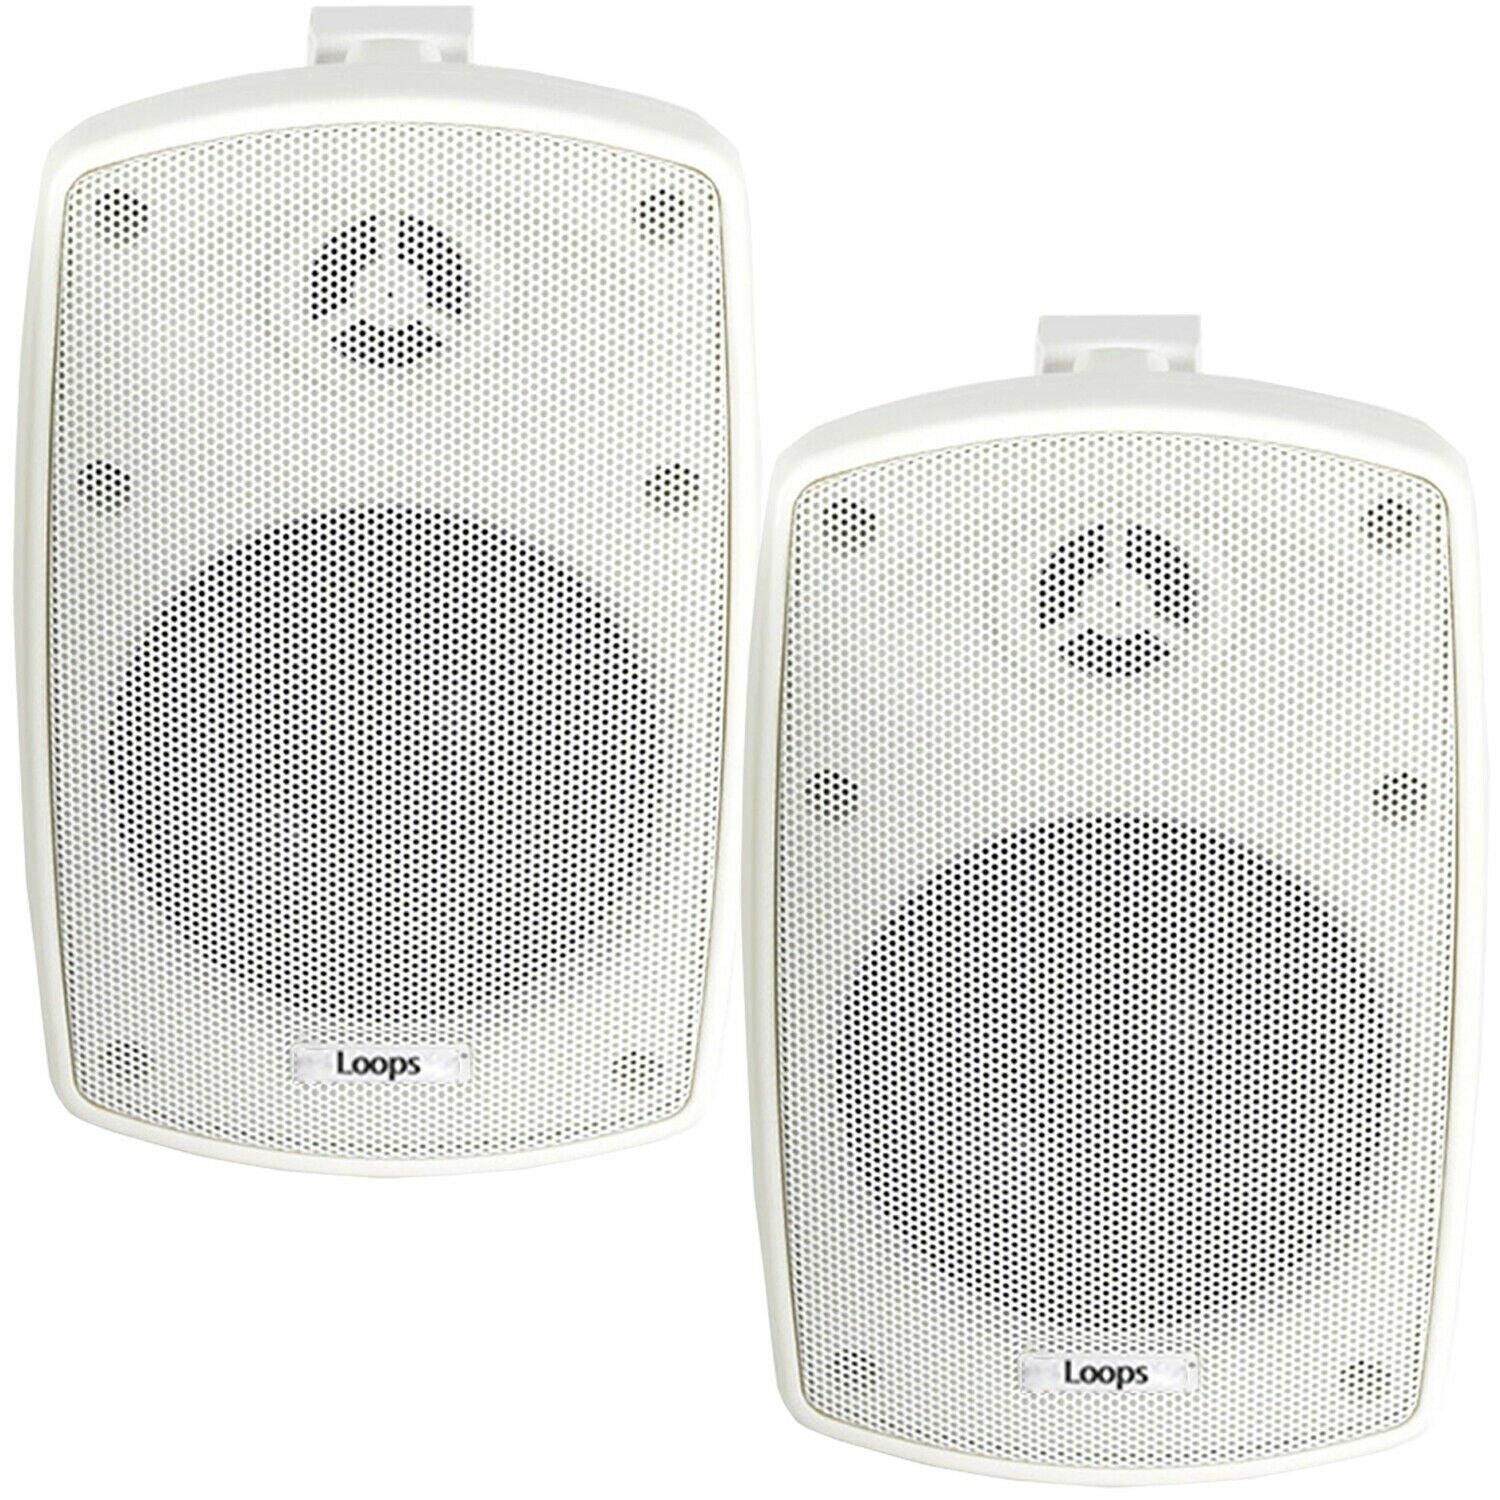 Loops 2x 4" 60W White Outdoor Rated Speakers 8 OHM Weatherproof Wall Mounted HiFi